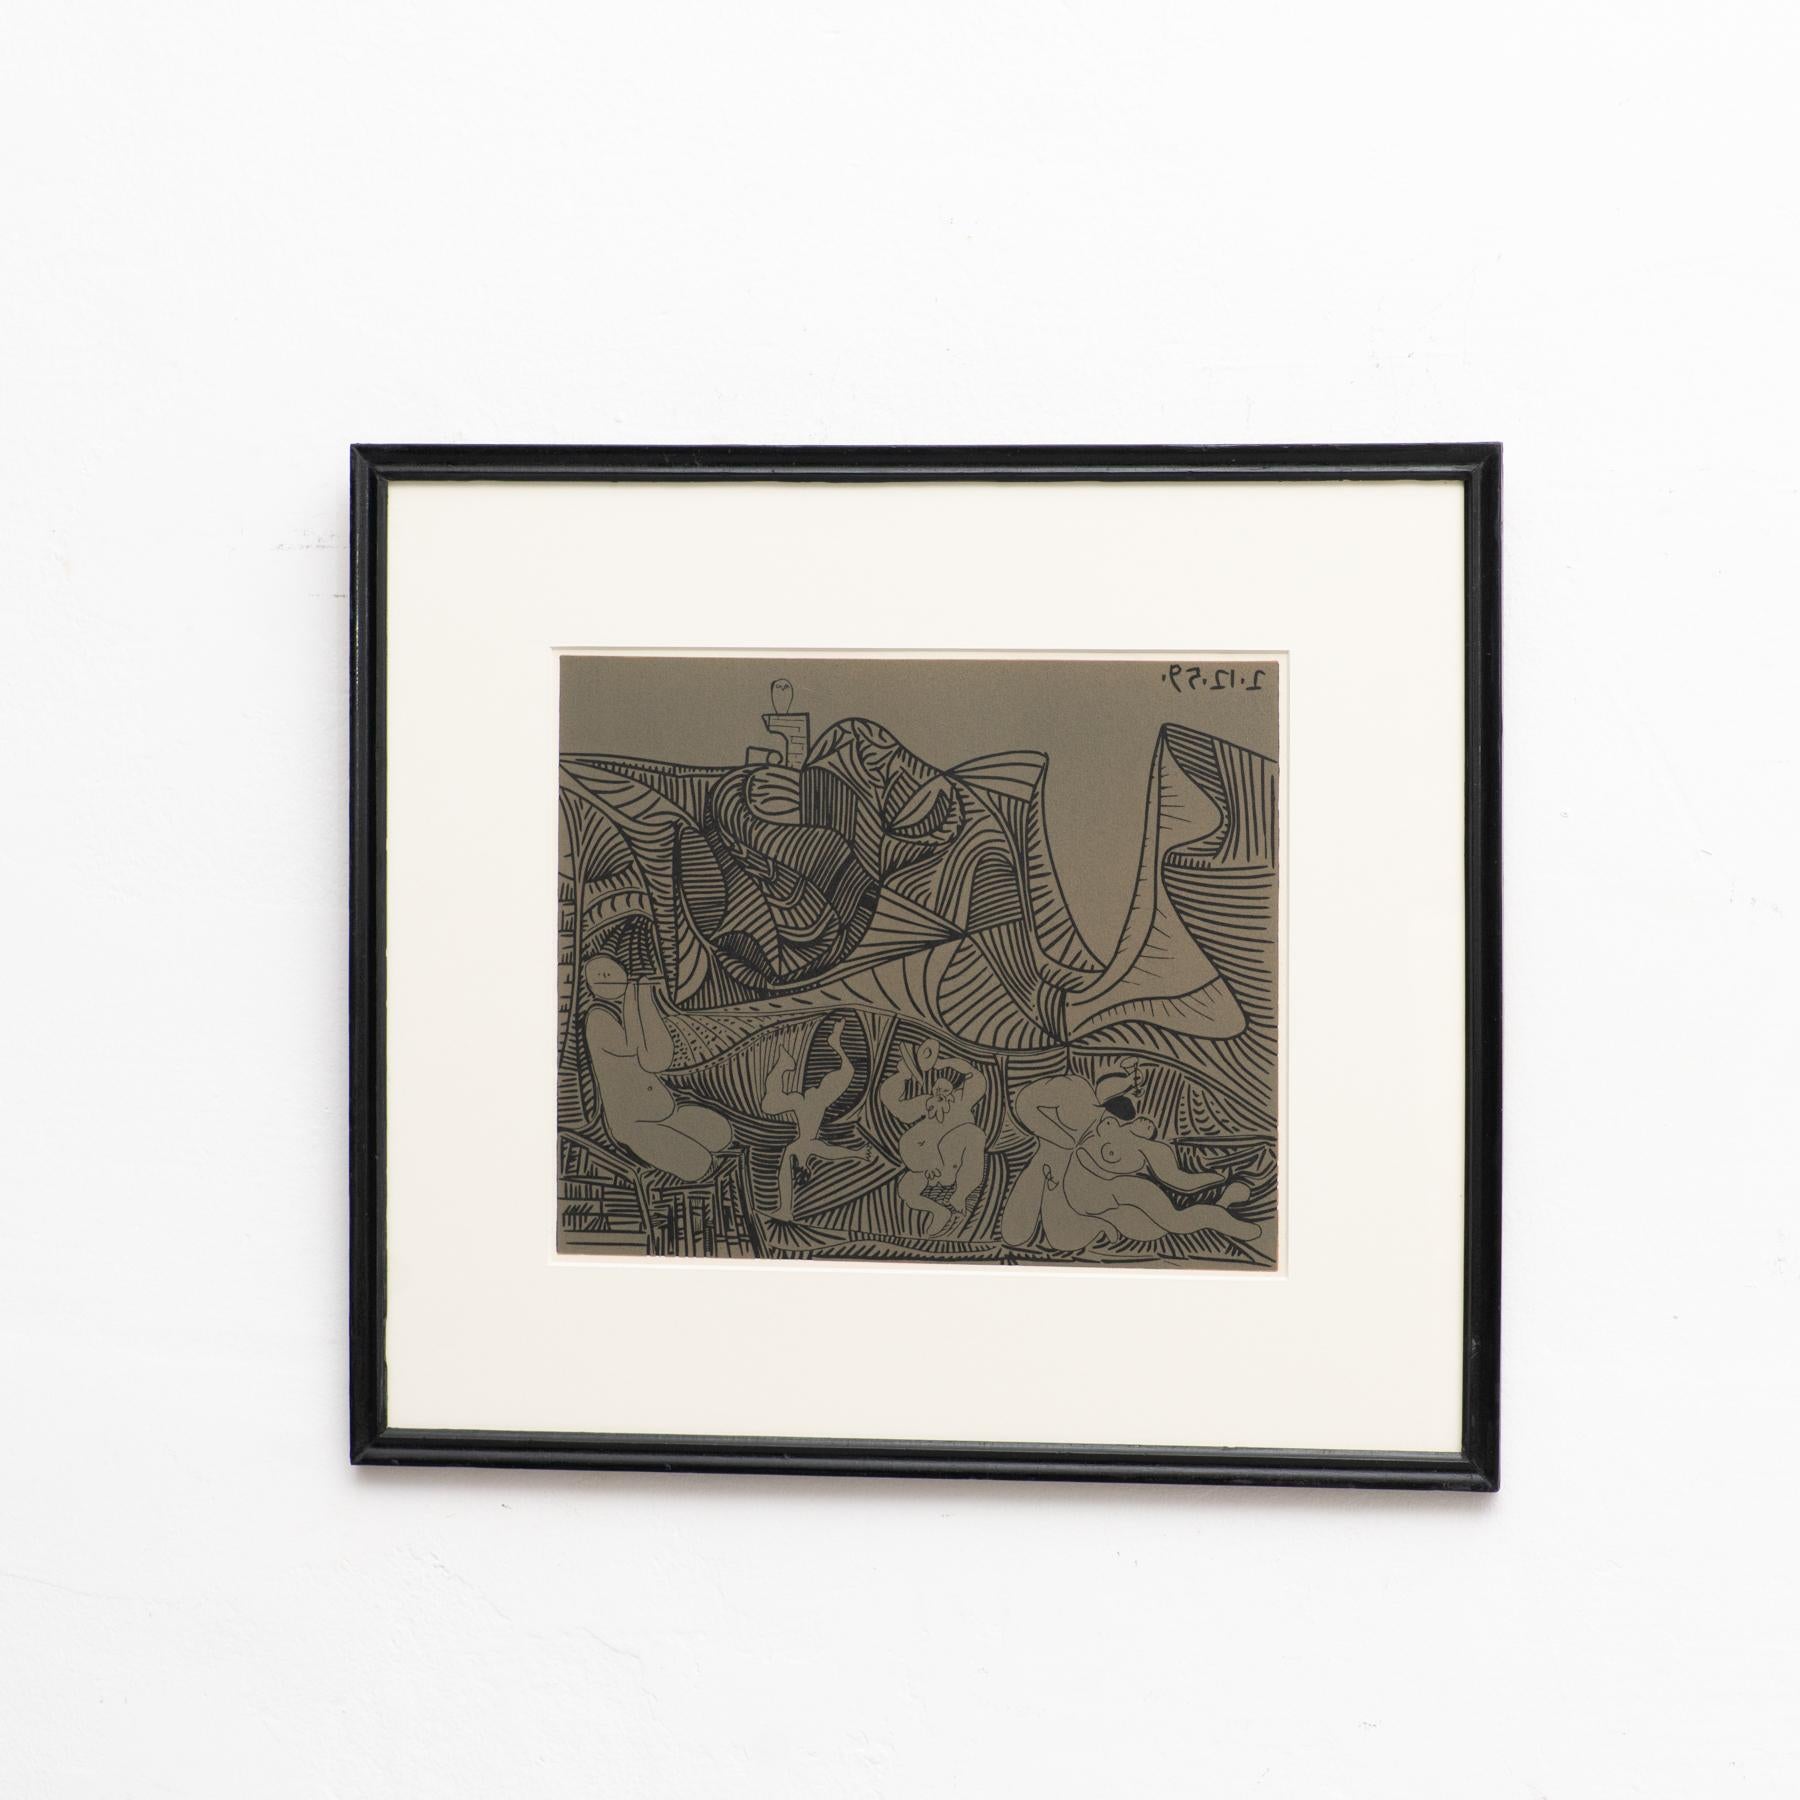 Paper Lithography After Picasso 'Bacchanale Au Hibou', 1959 For Sale